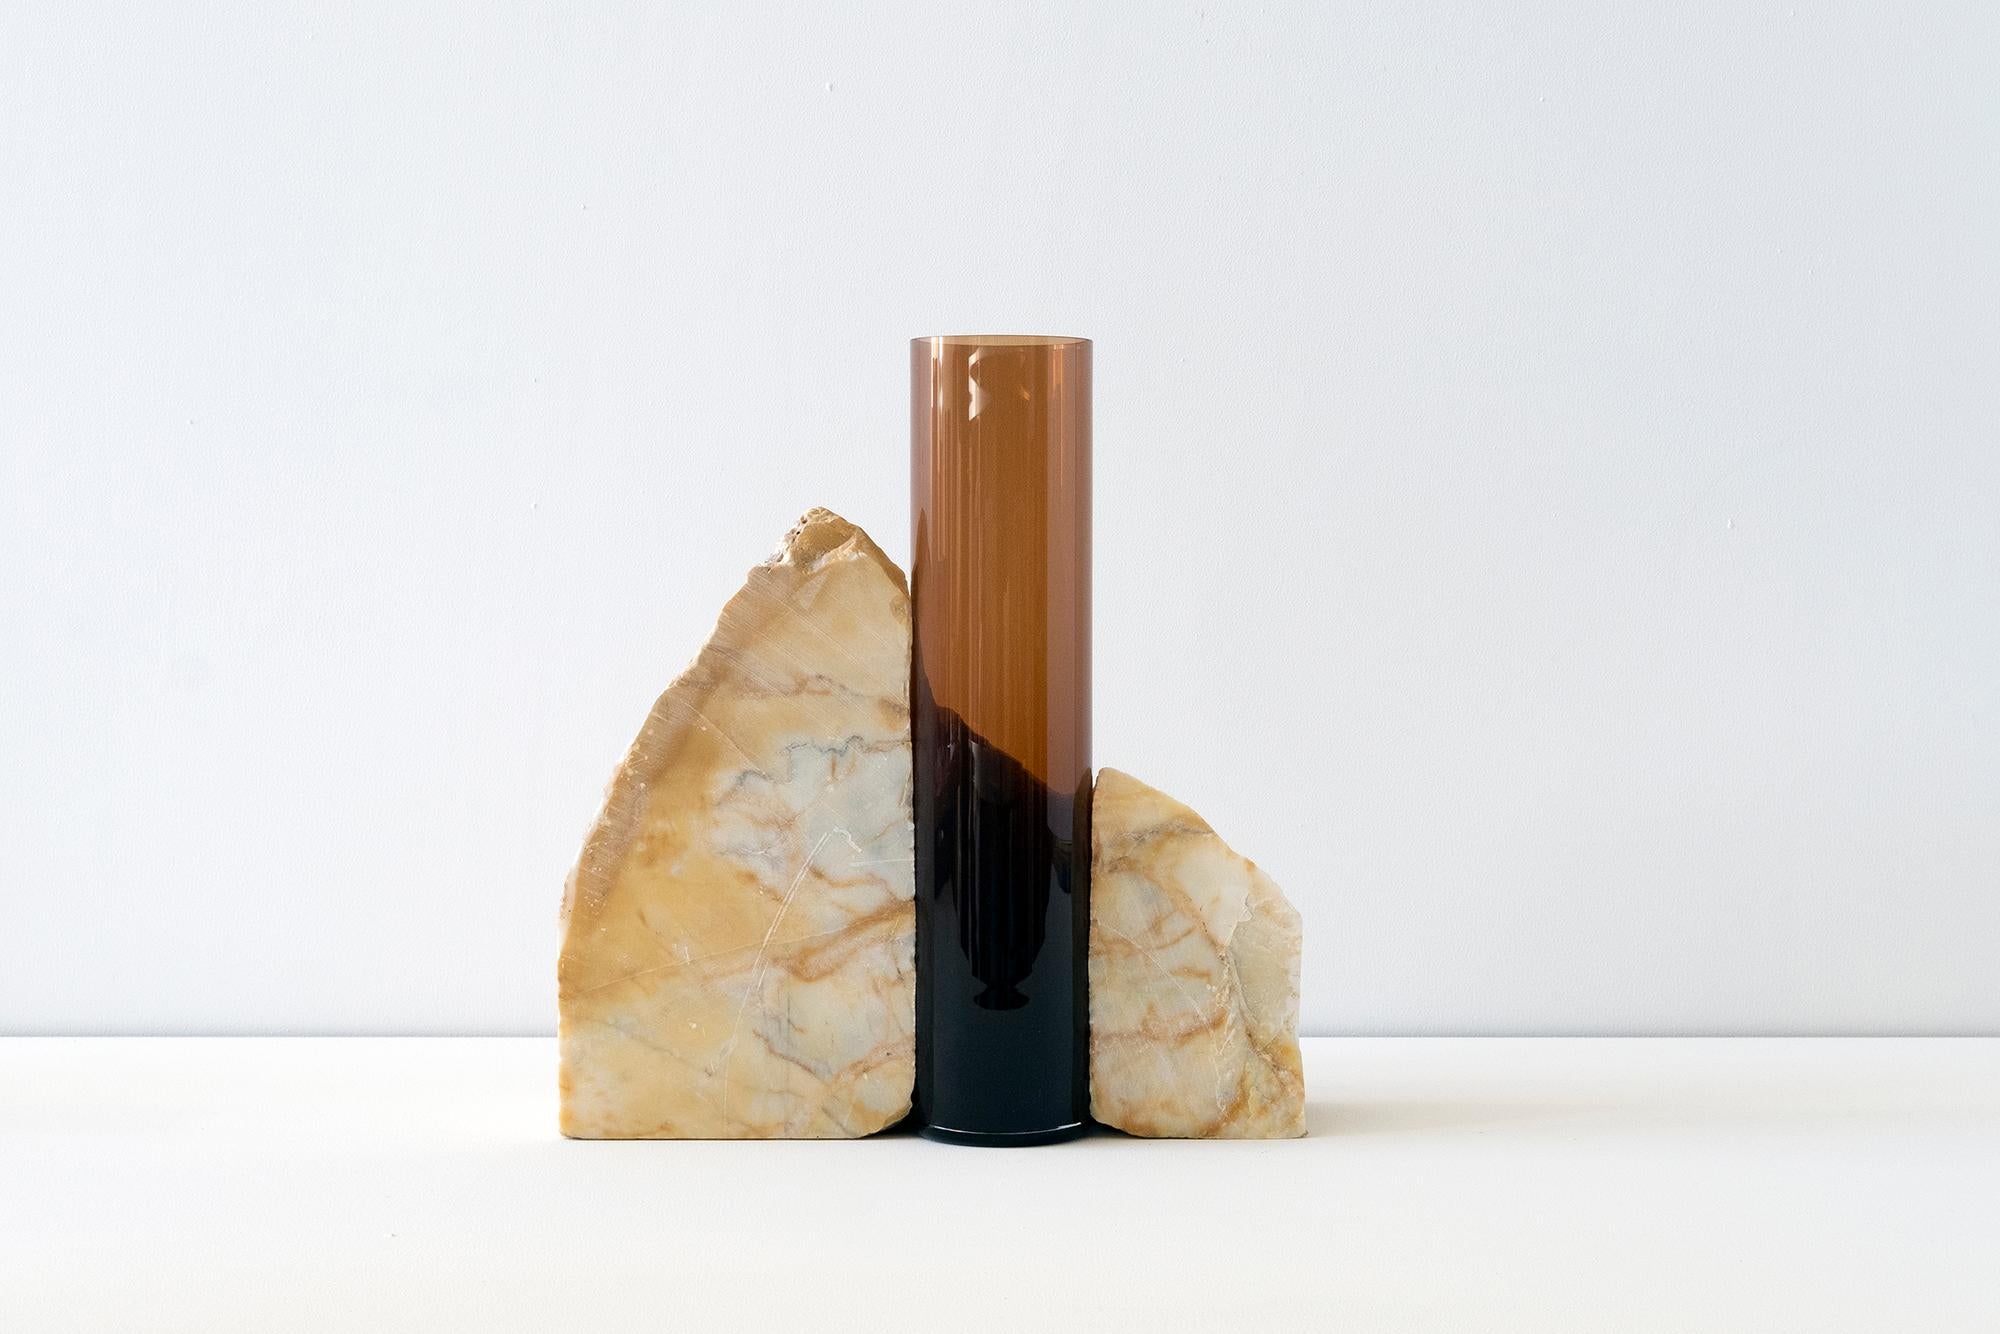 Italian Contemporary Vase, Giallo Siena Marble Brown Glass Cylinder, by Erik Olovsson For Sale